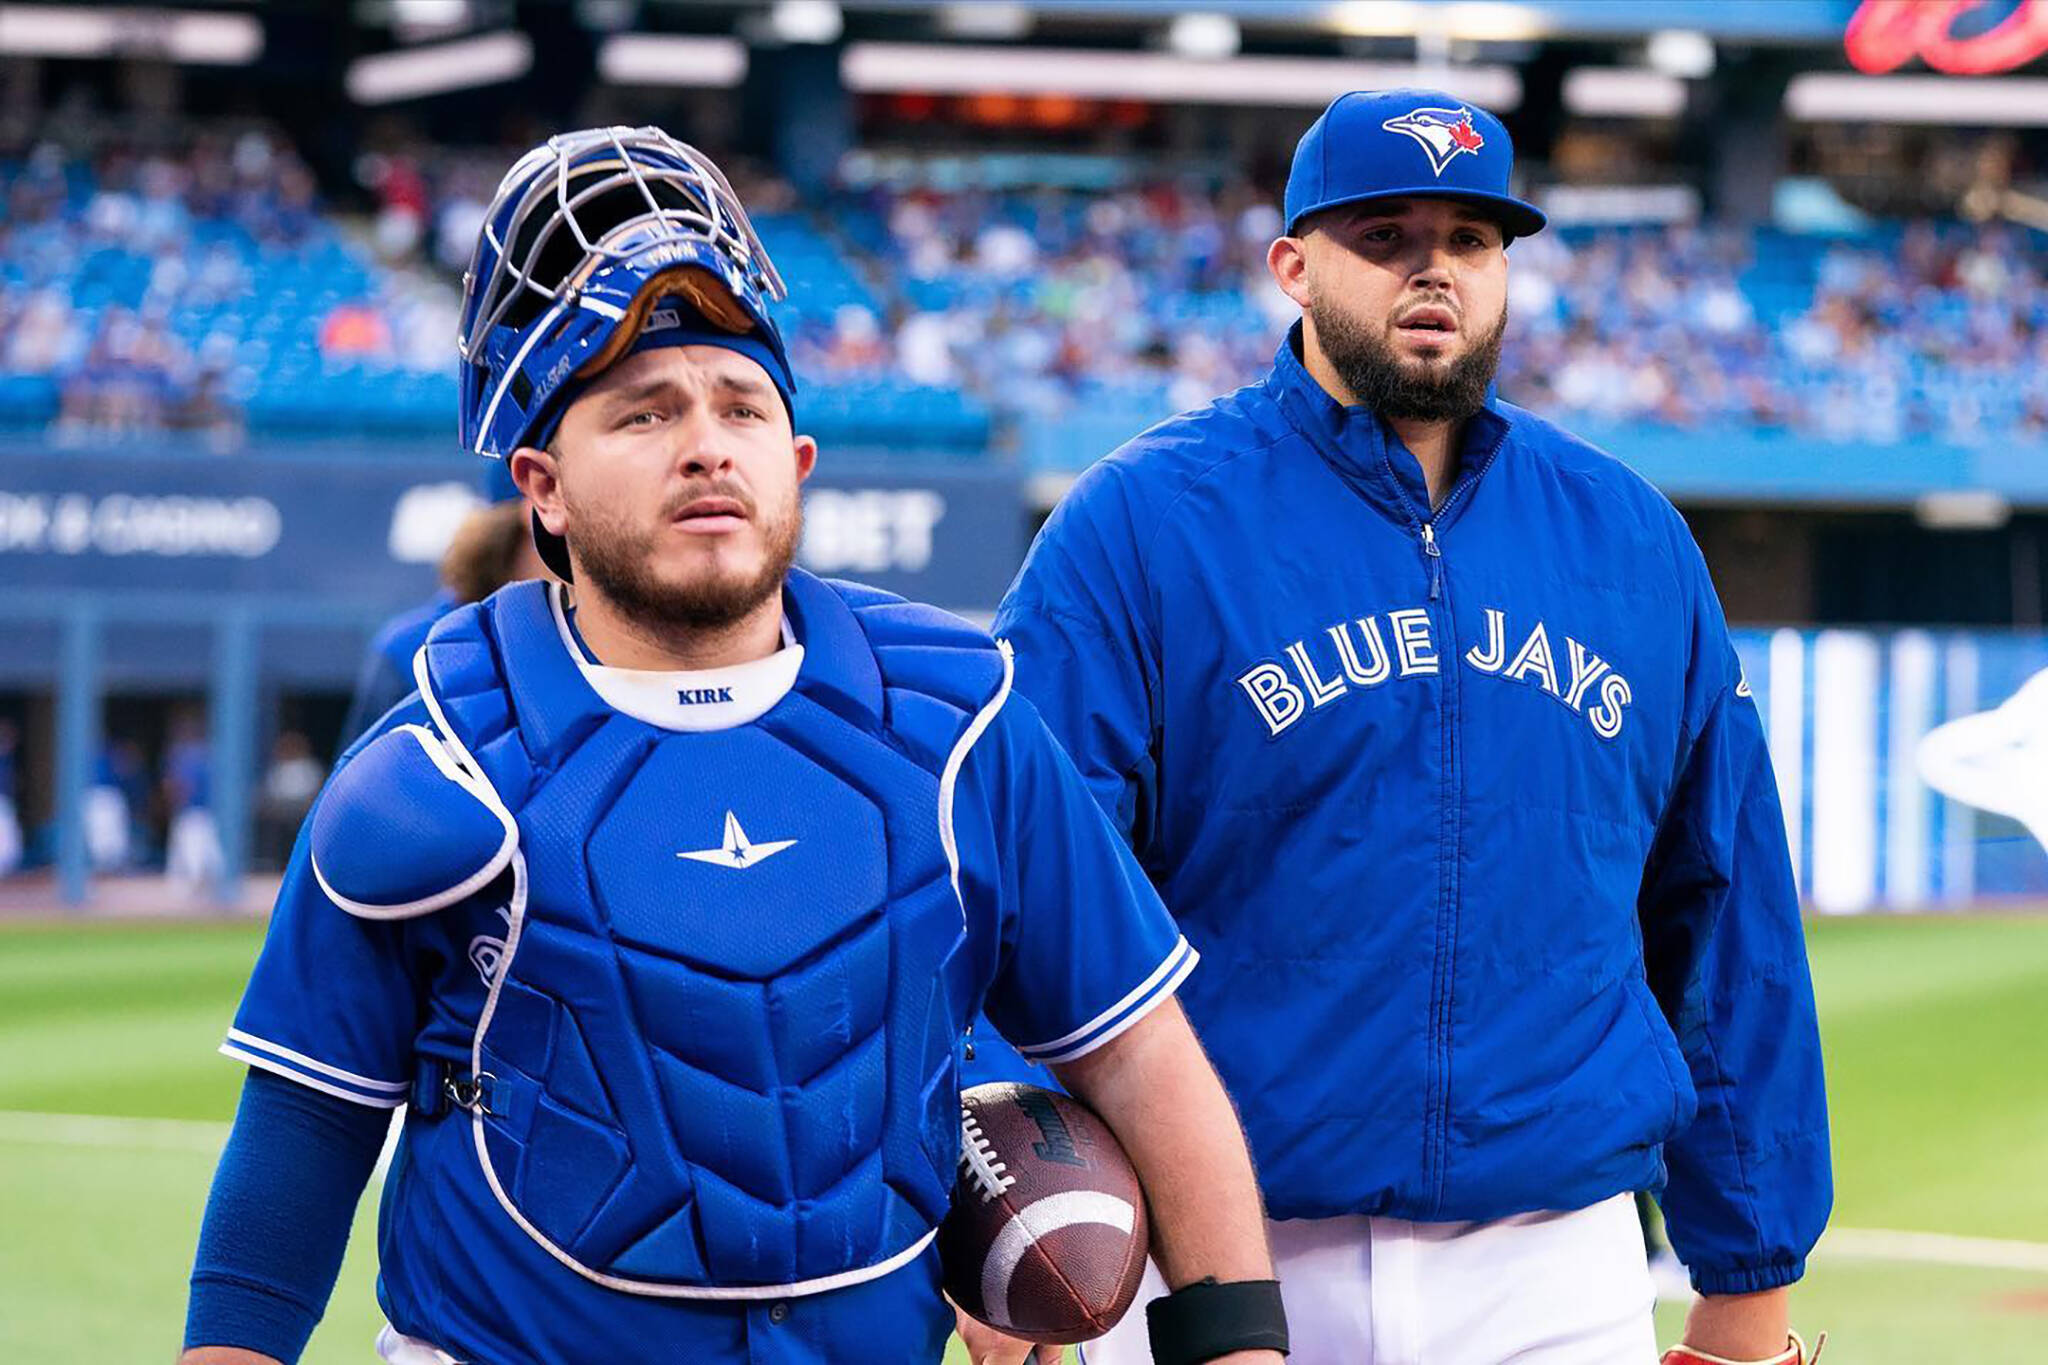 Toronto Blue Jays pitcher hailed for going after fat-shaming jerk